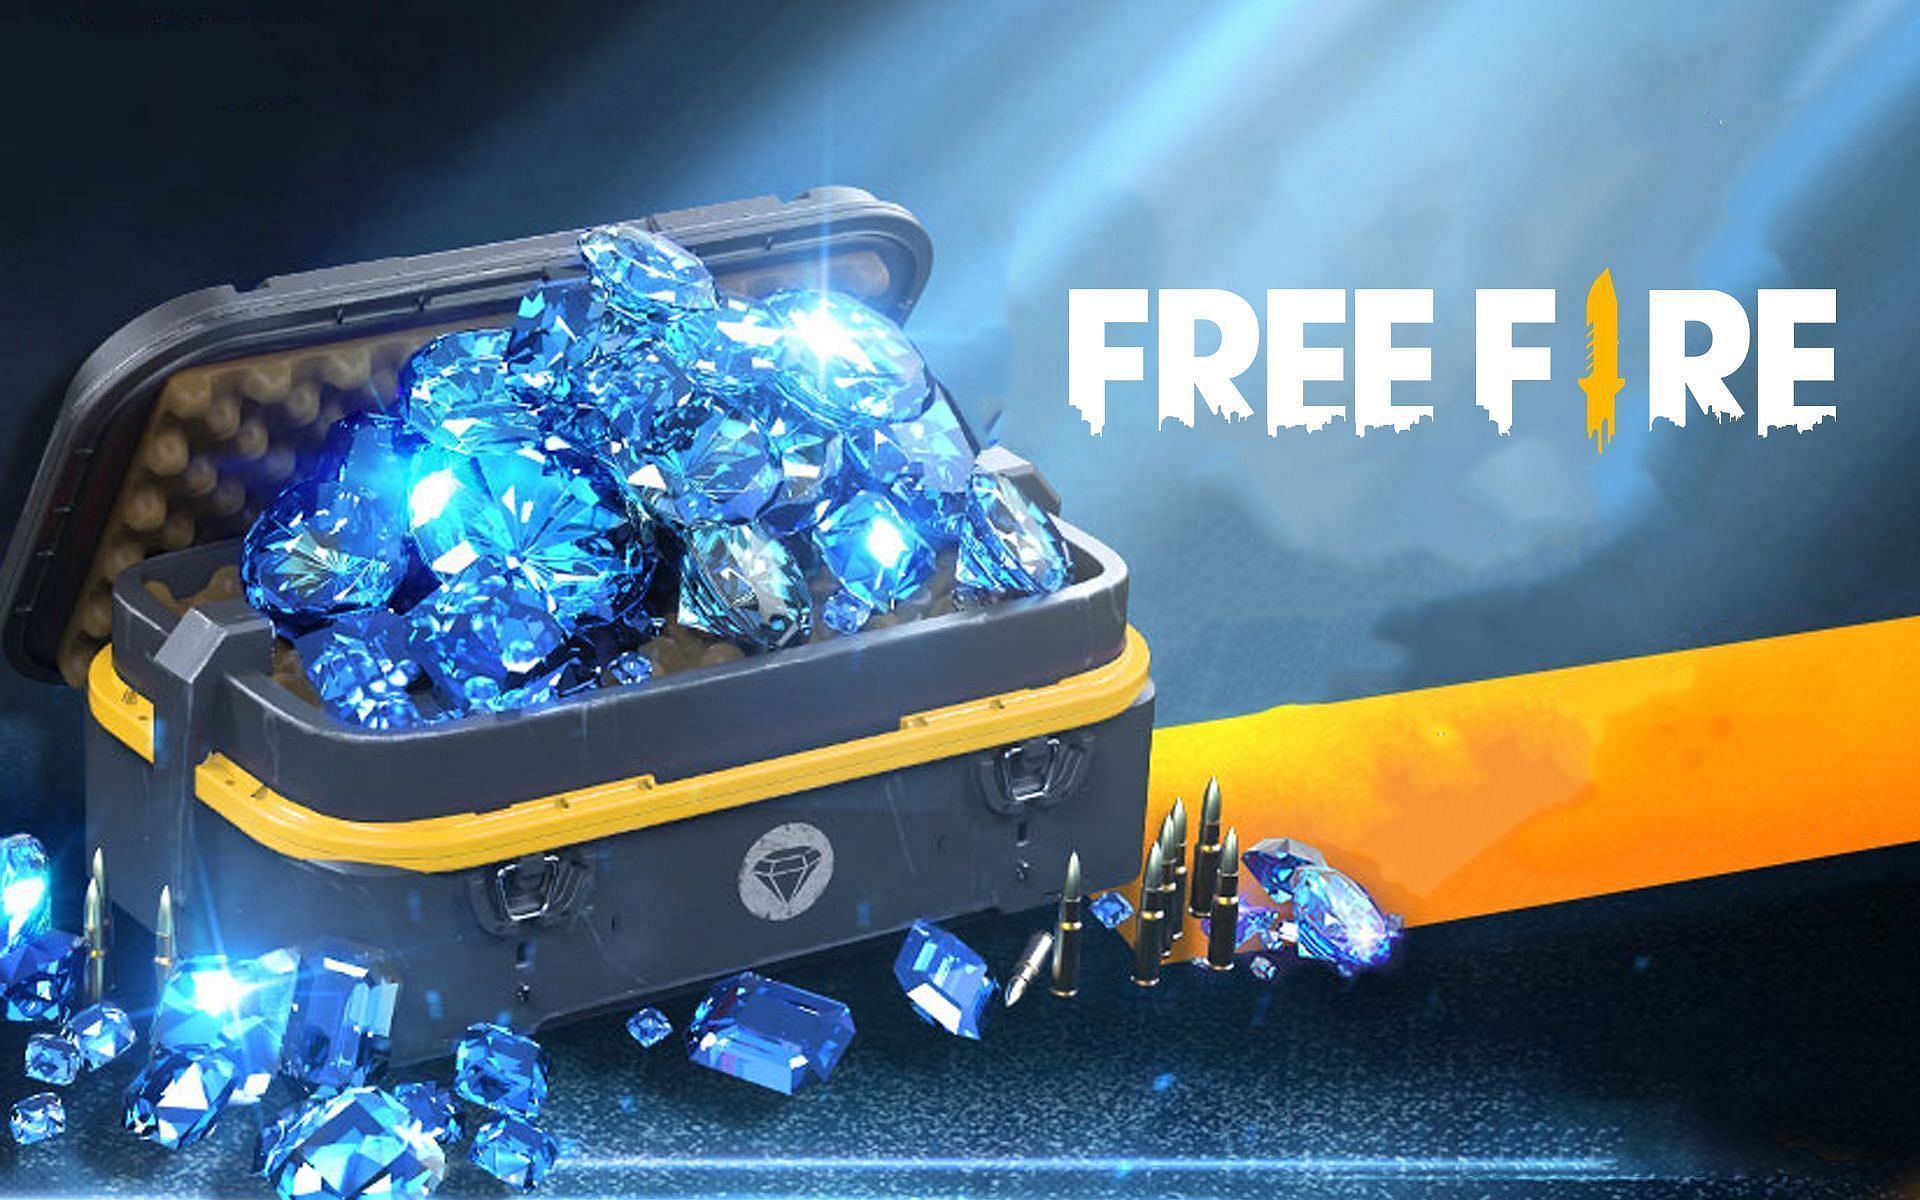 How to get free diamonds for Free Fire Booyah Pass in 2023